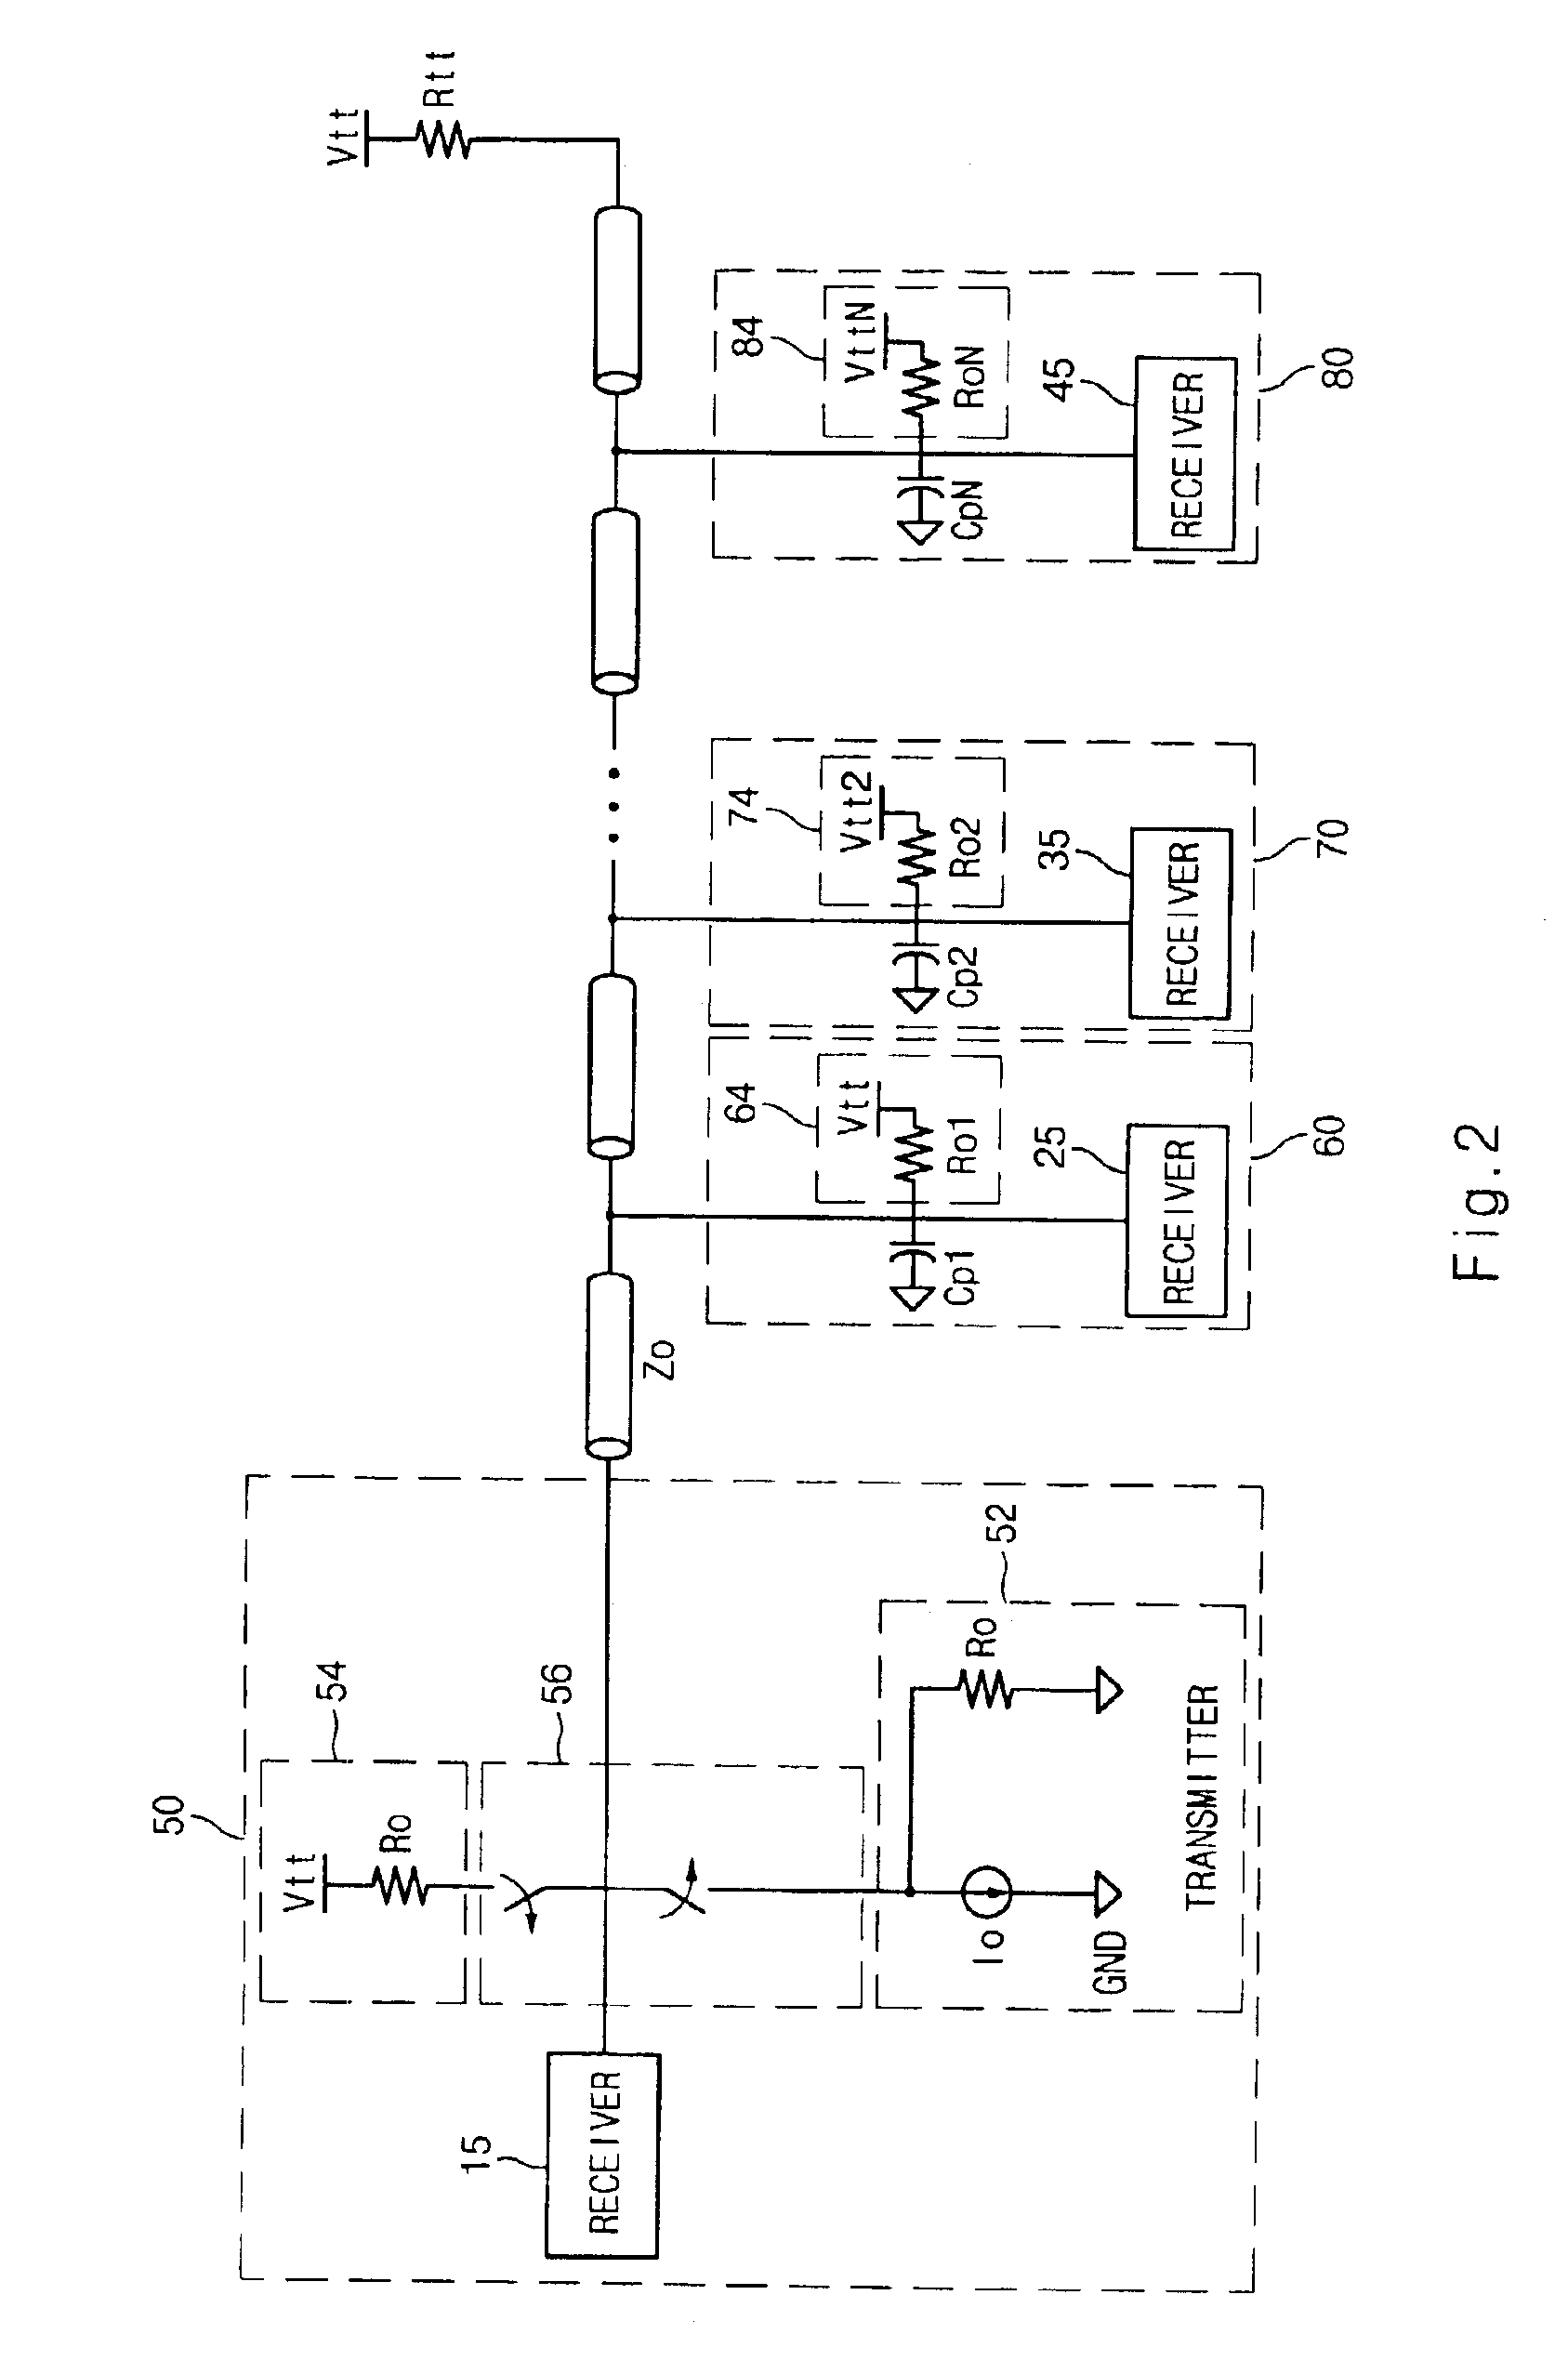 Device and system having self-terminated driver and active terminator for high speed interface